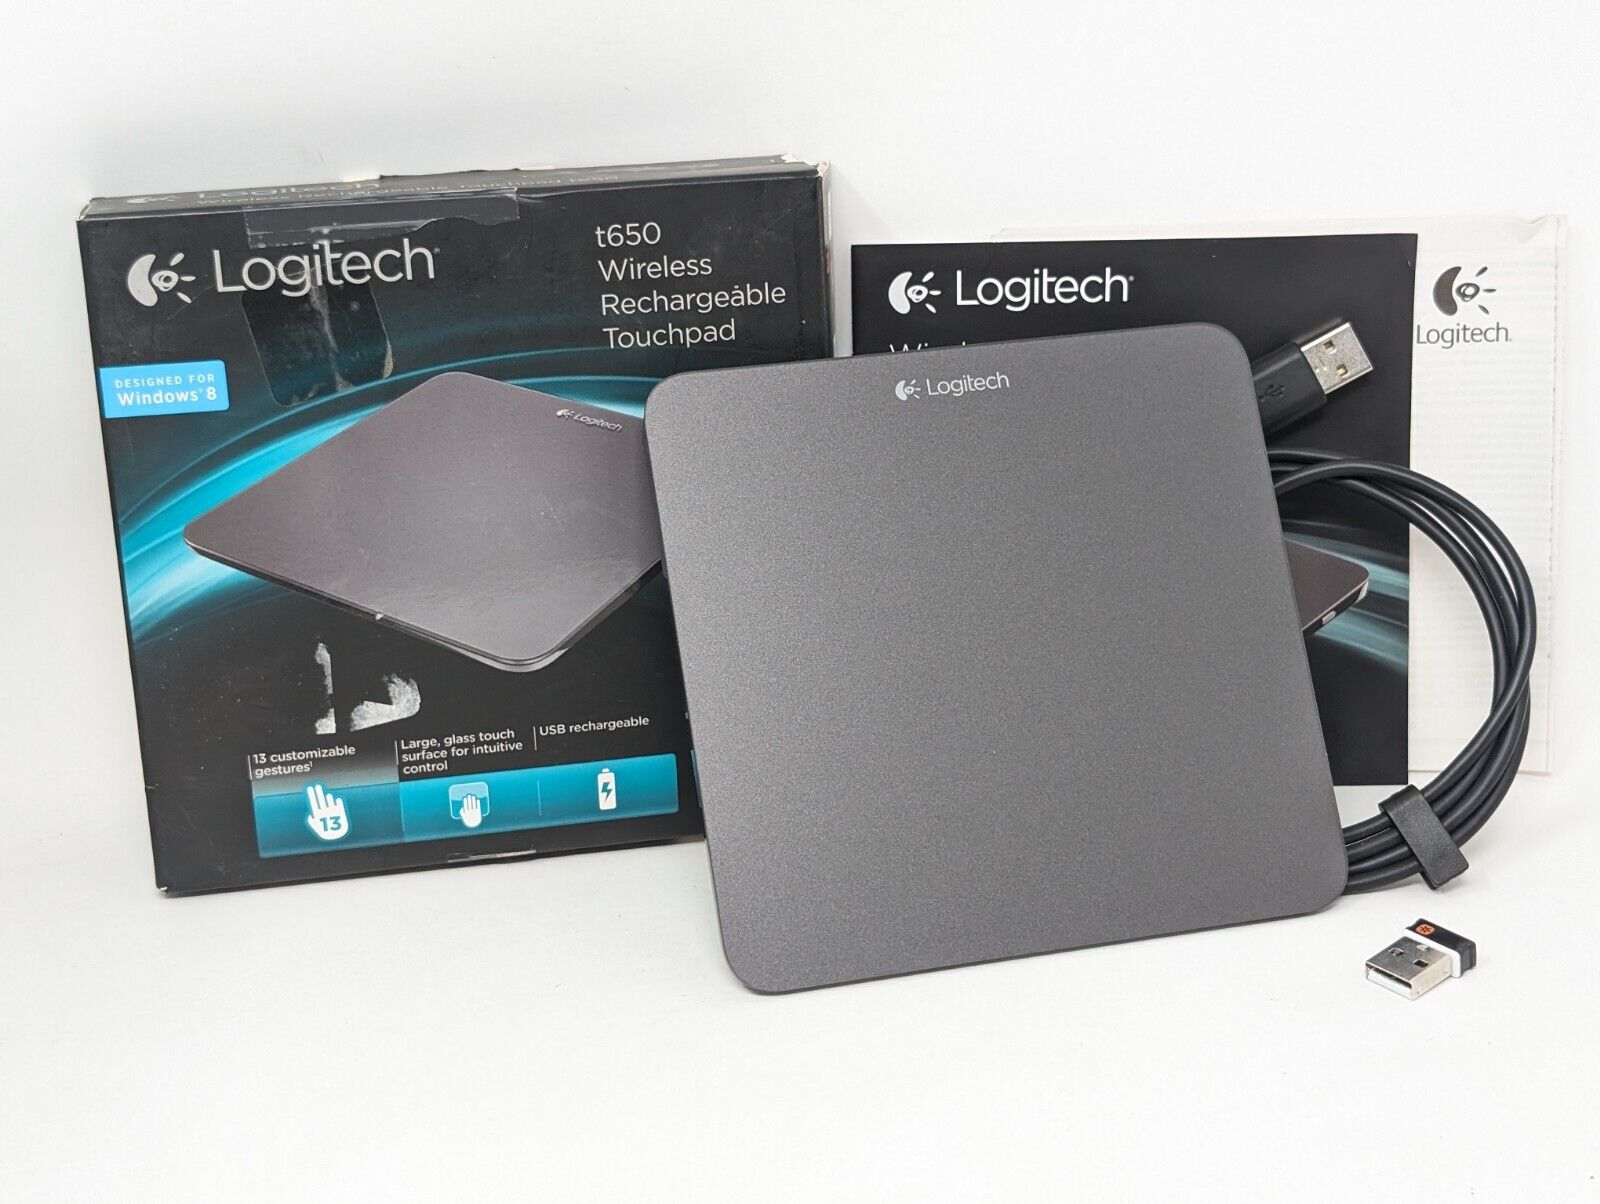 Logitech T650 Wireless Rechargeable Touchpad - Tested